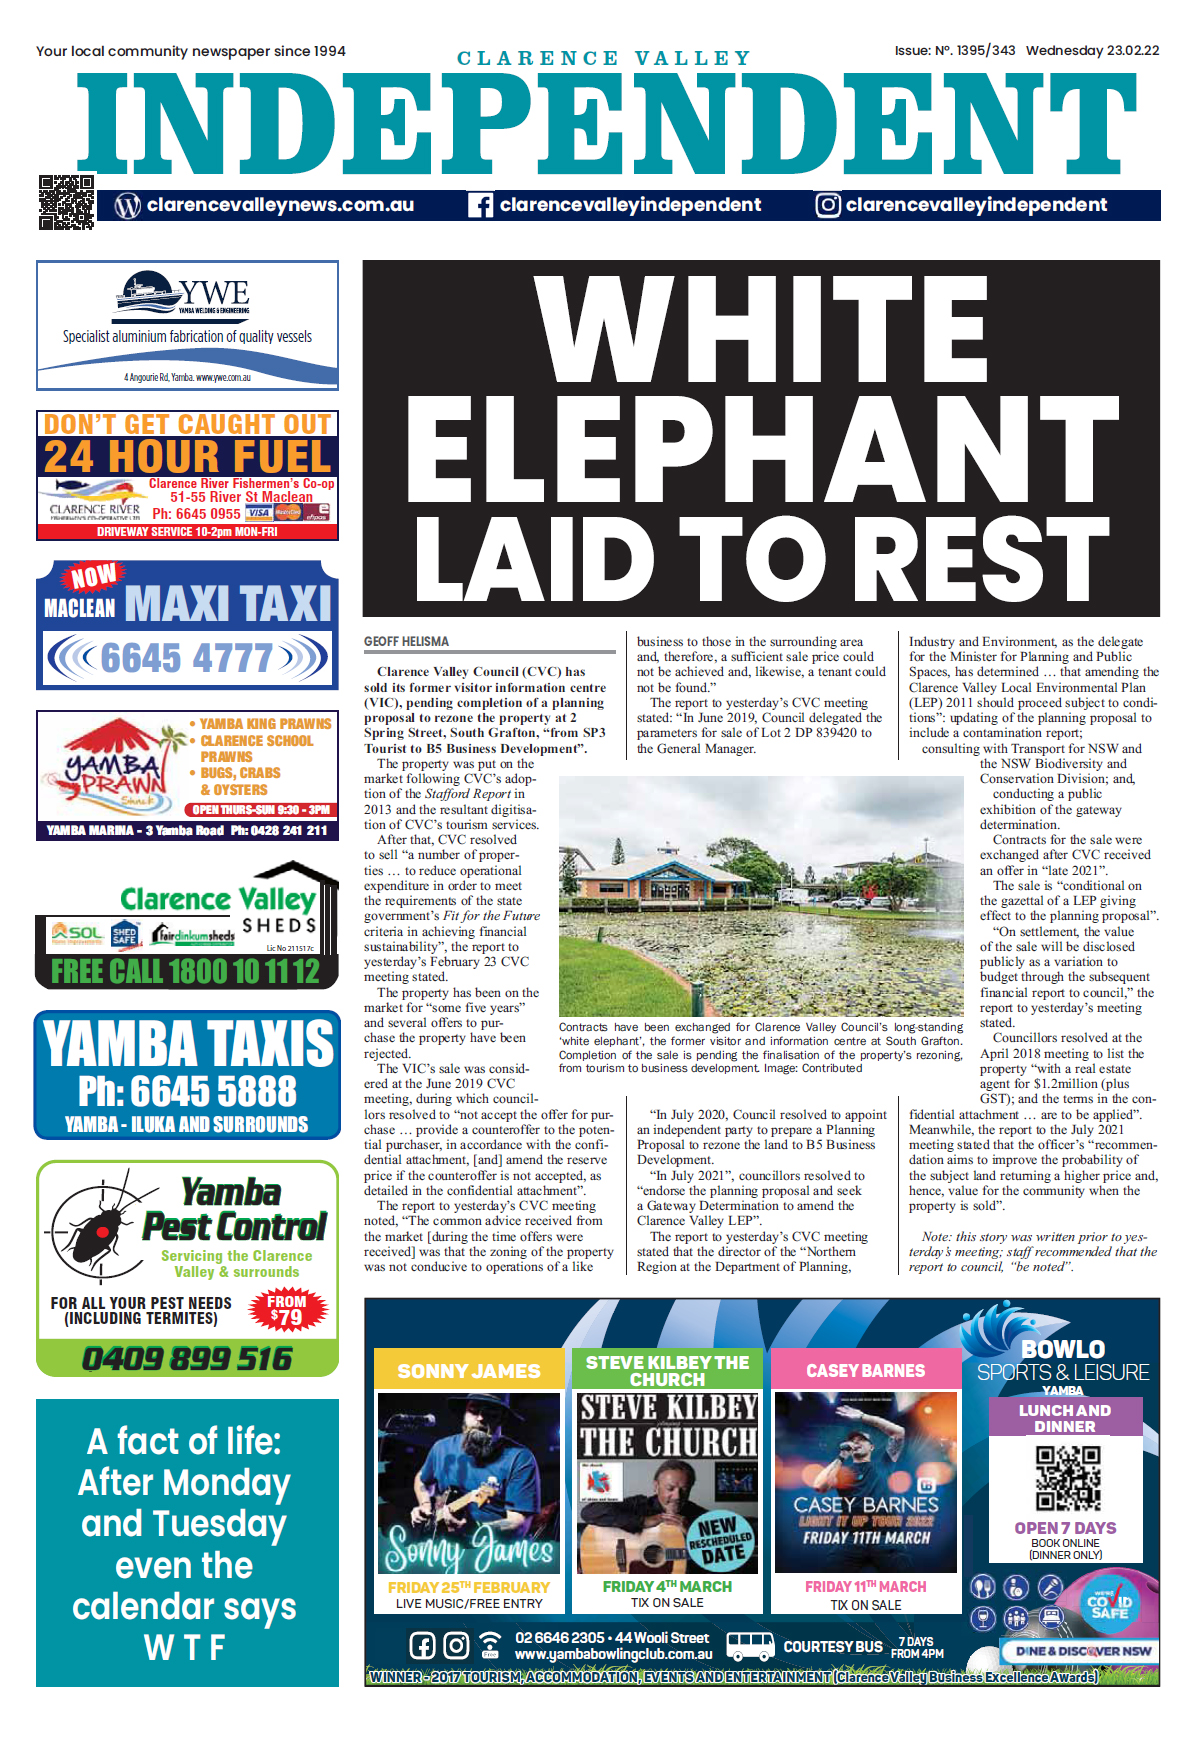 Clarence Valley Independent 23 February 2022